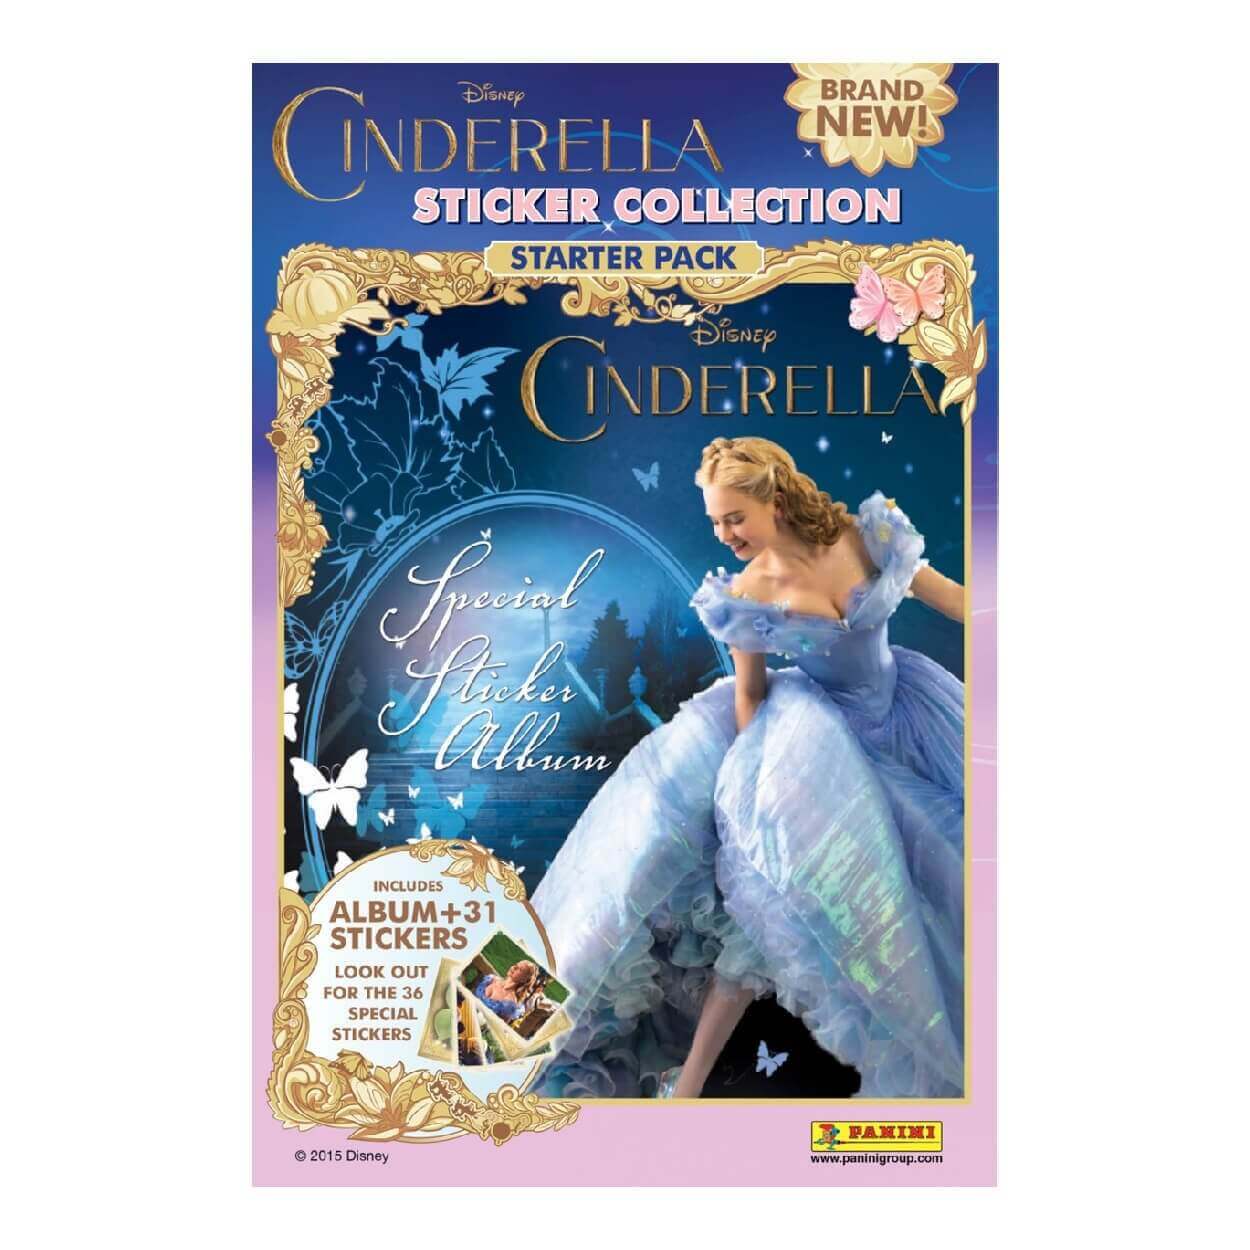 Panini Cinderella Sticker Collection Product: Starter Pack (31 Stickers) Sticker Collection Earthlets